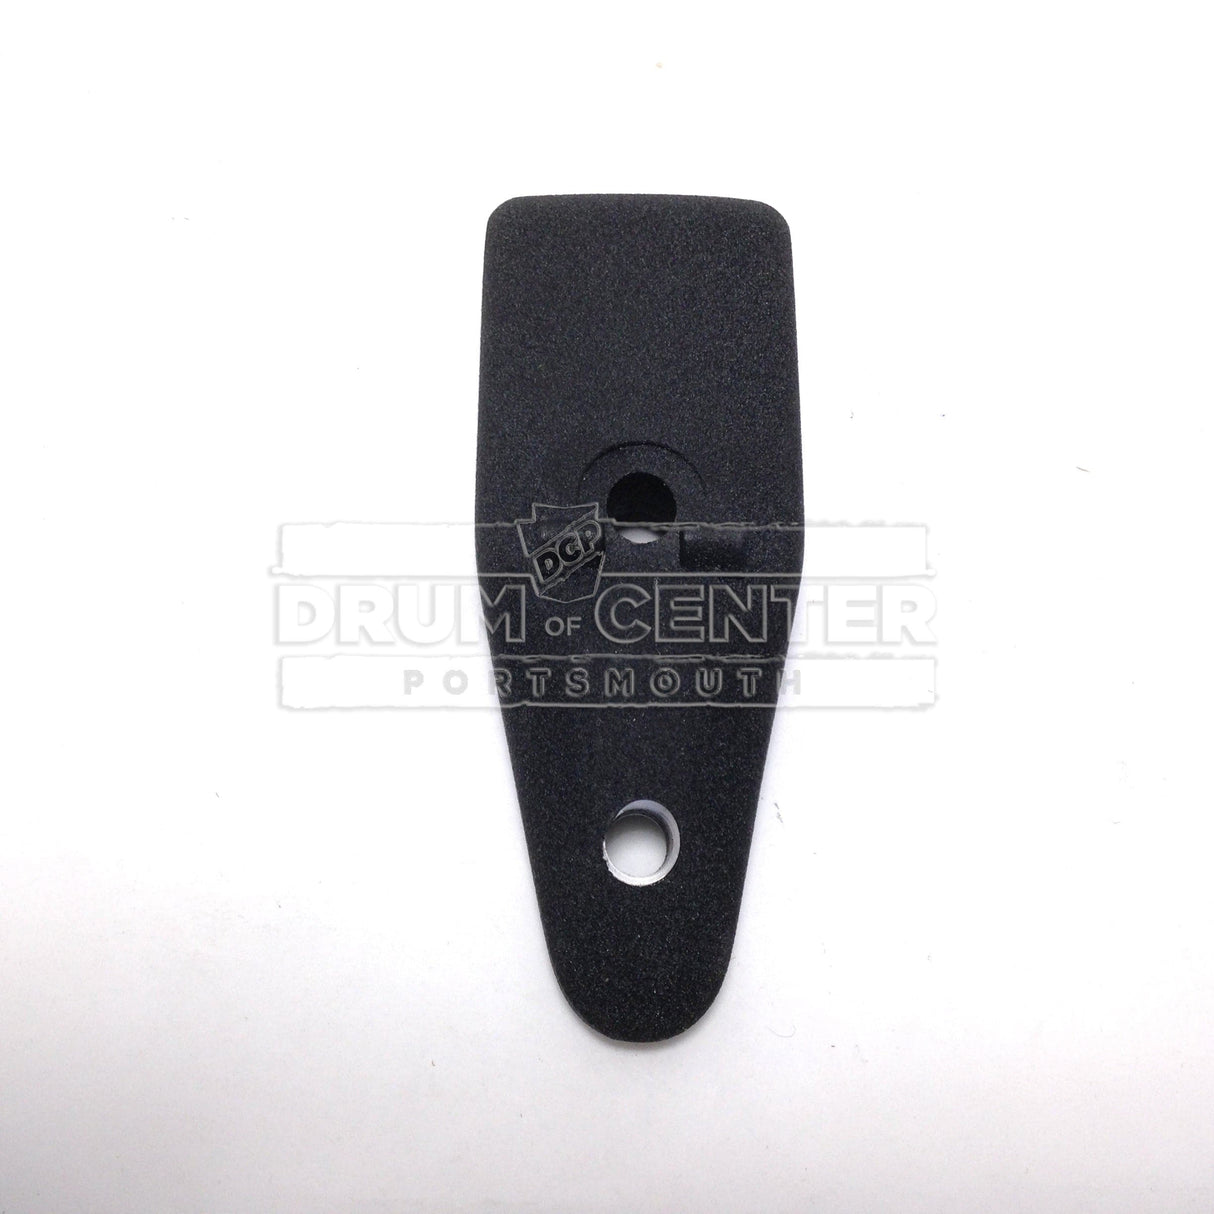 DW Parts : Toe Clamp With Mounting Hole For ScreWith Nut